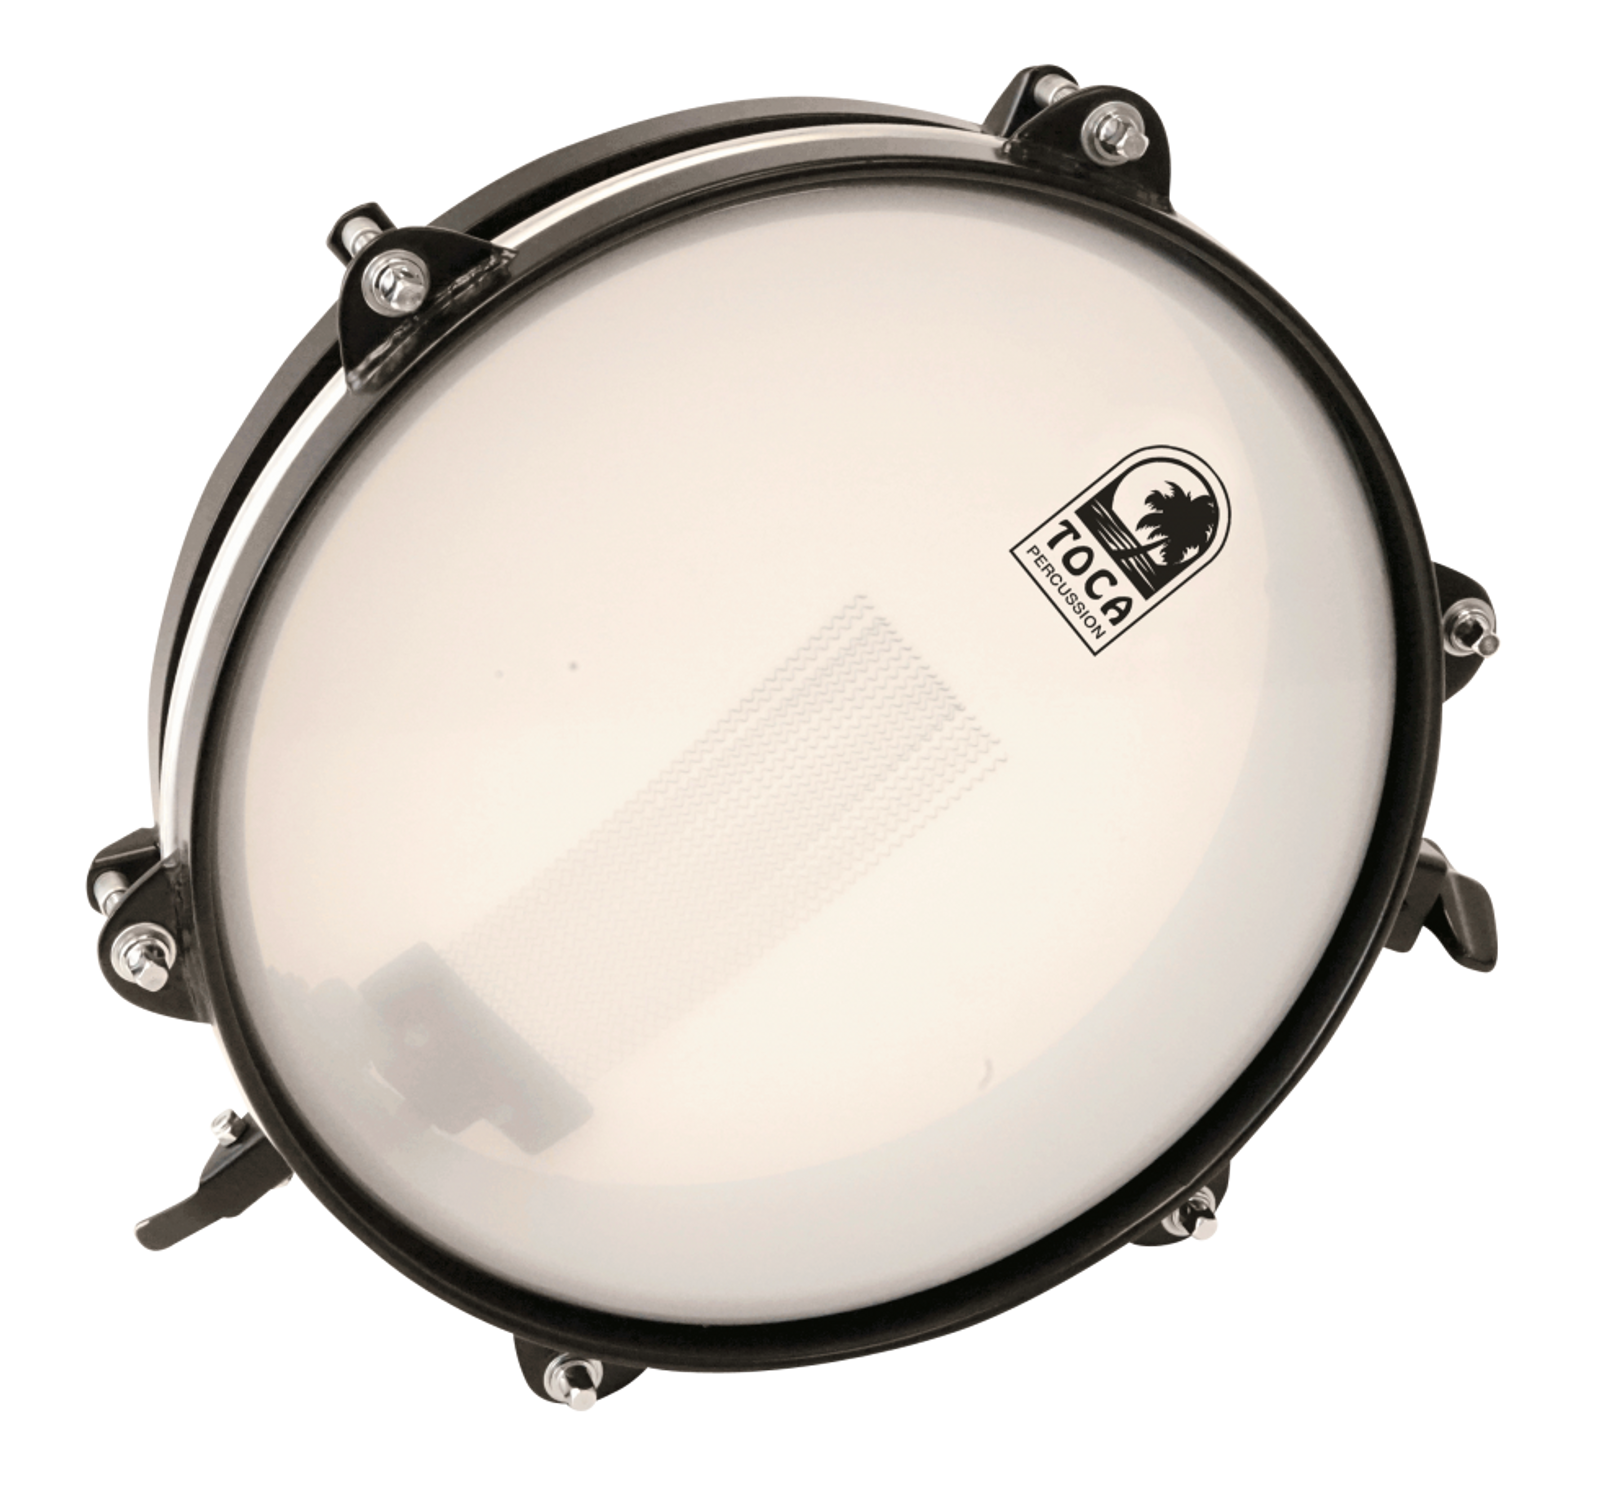 Toca (TAUX10-SN) 10" Auxiliary Snare Drum with Mount for 3/8" Accessory Post